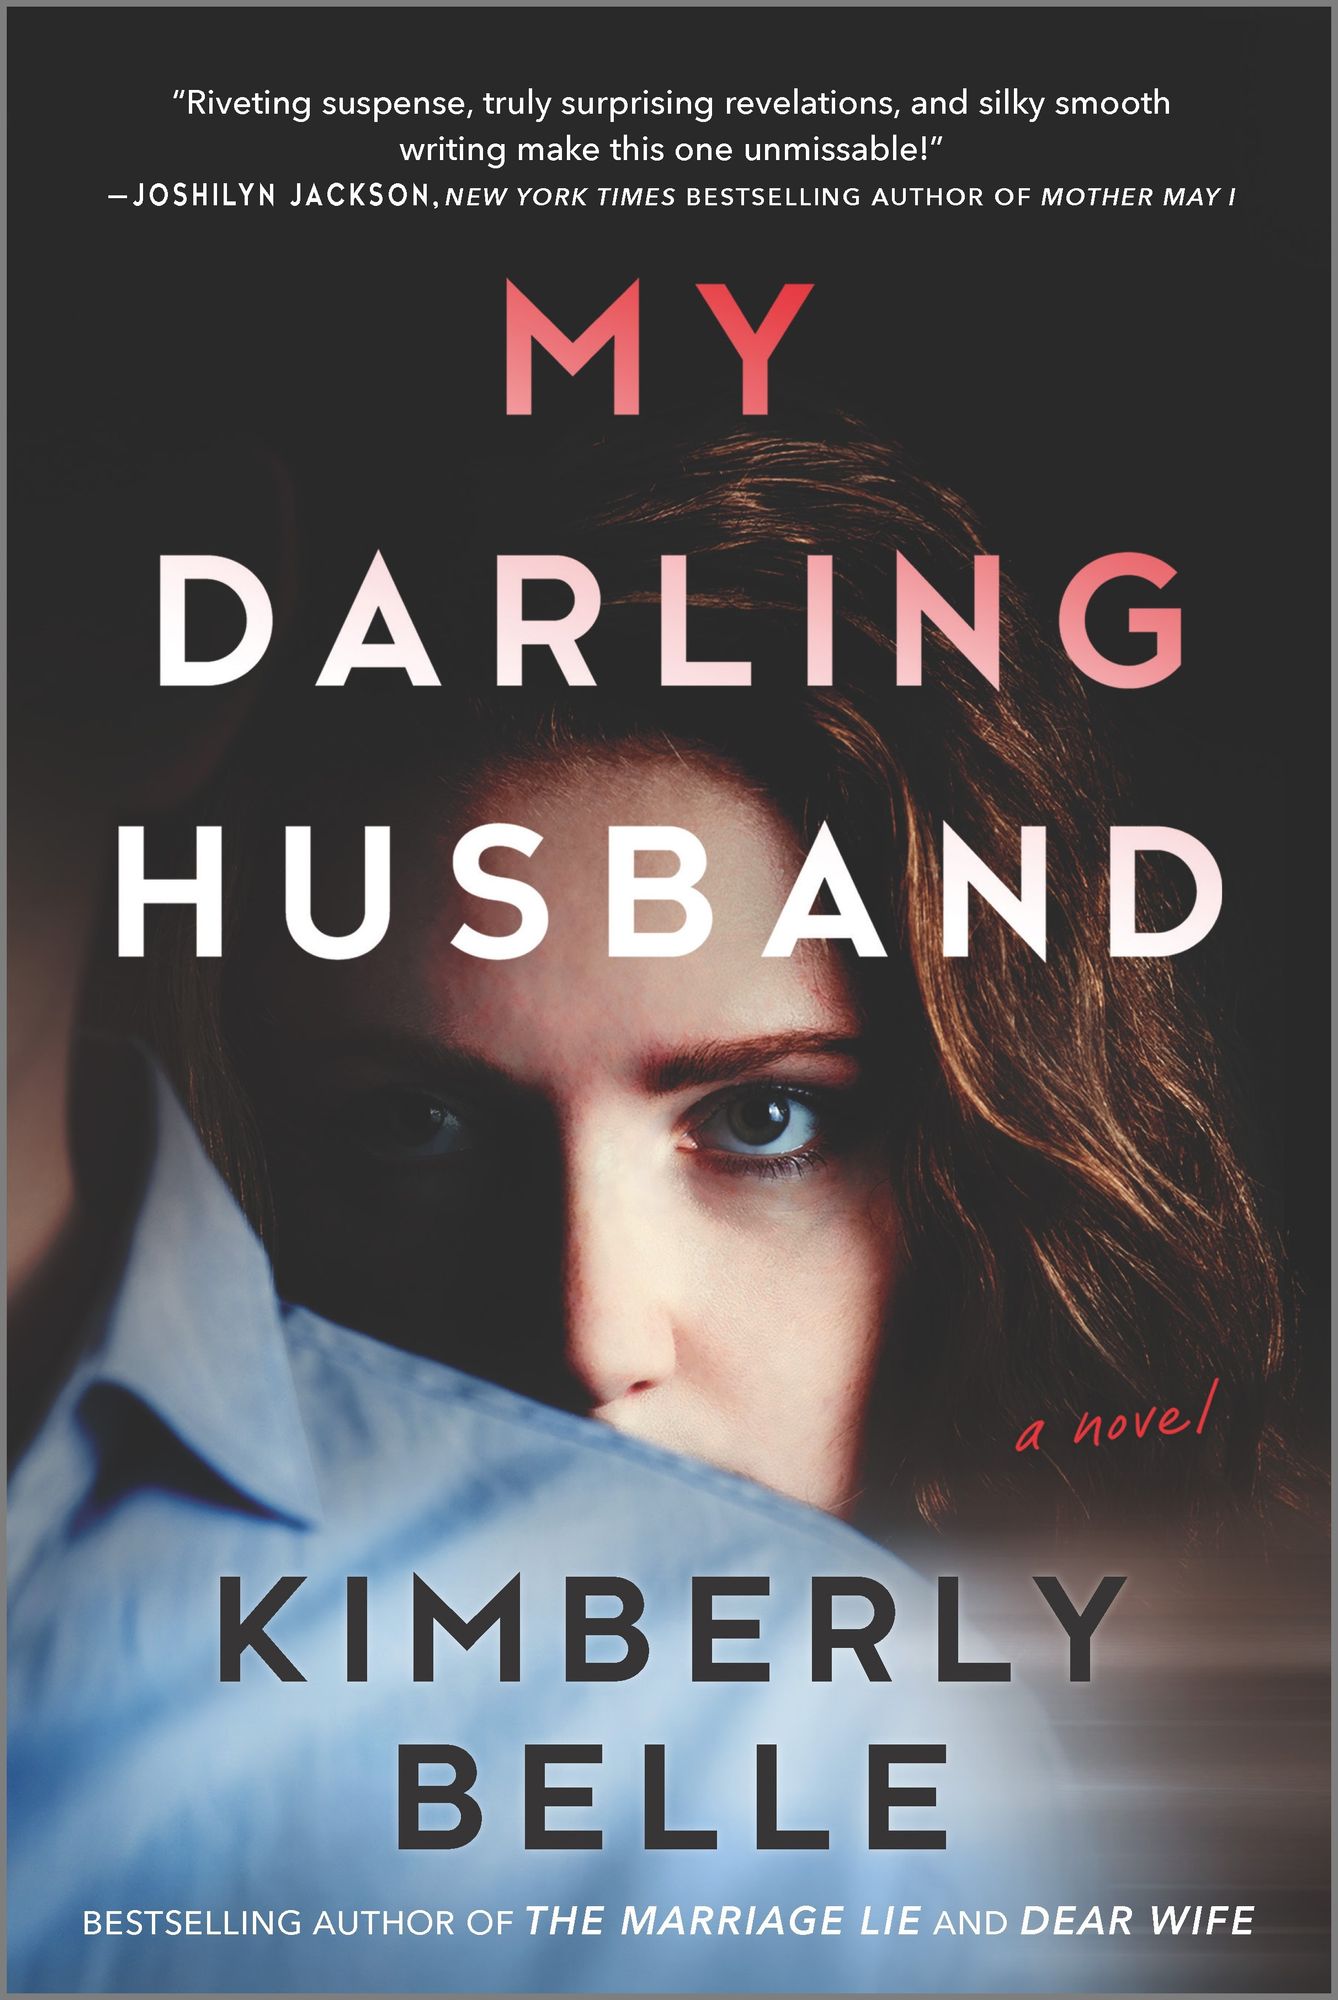 My Darling Husband by Kimberly Belle